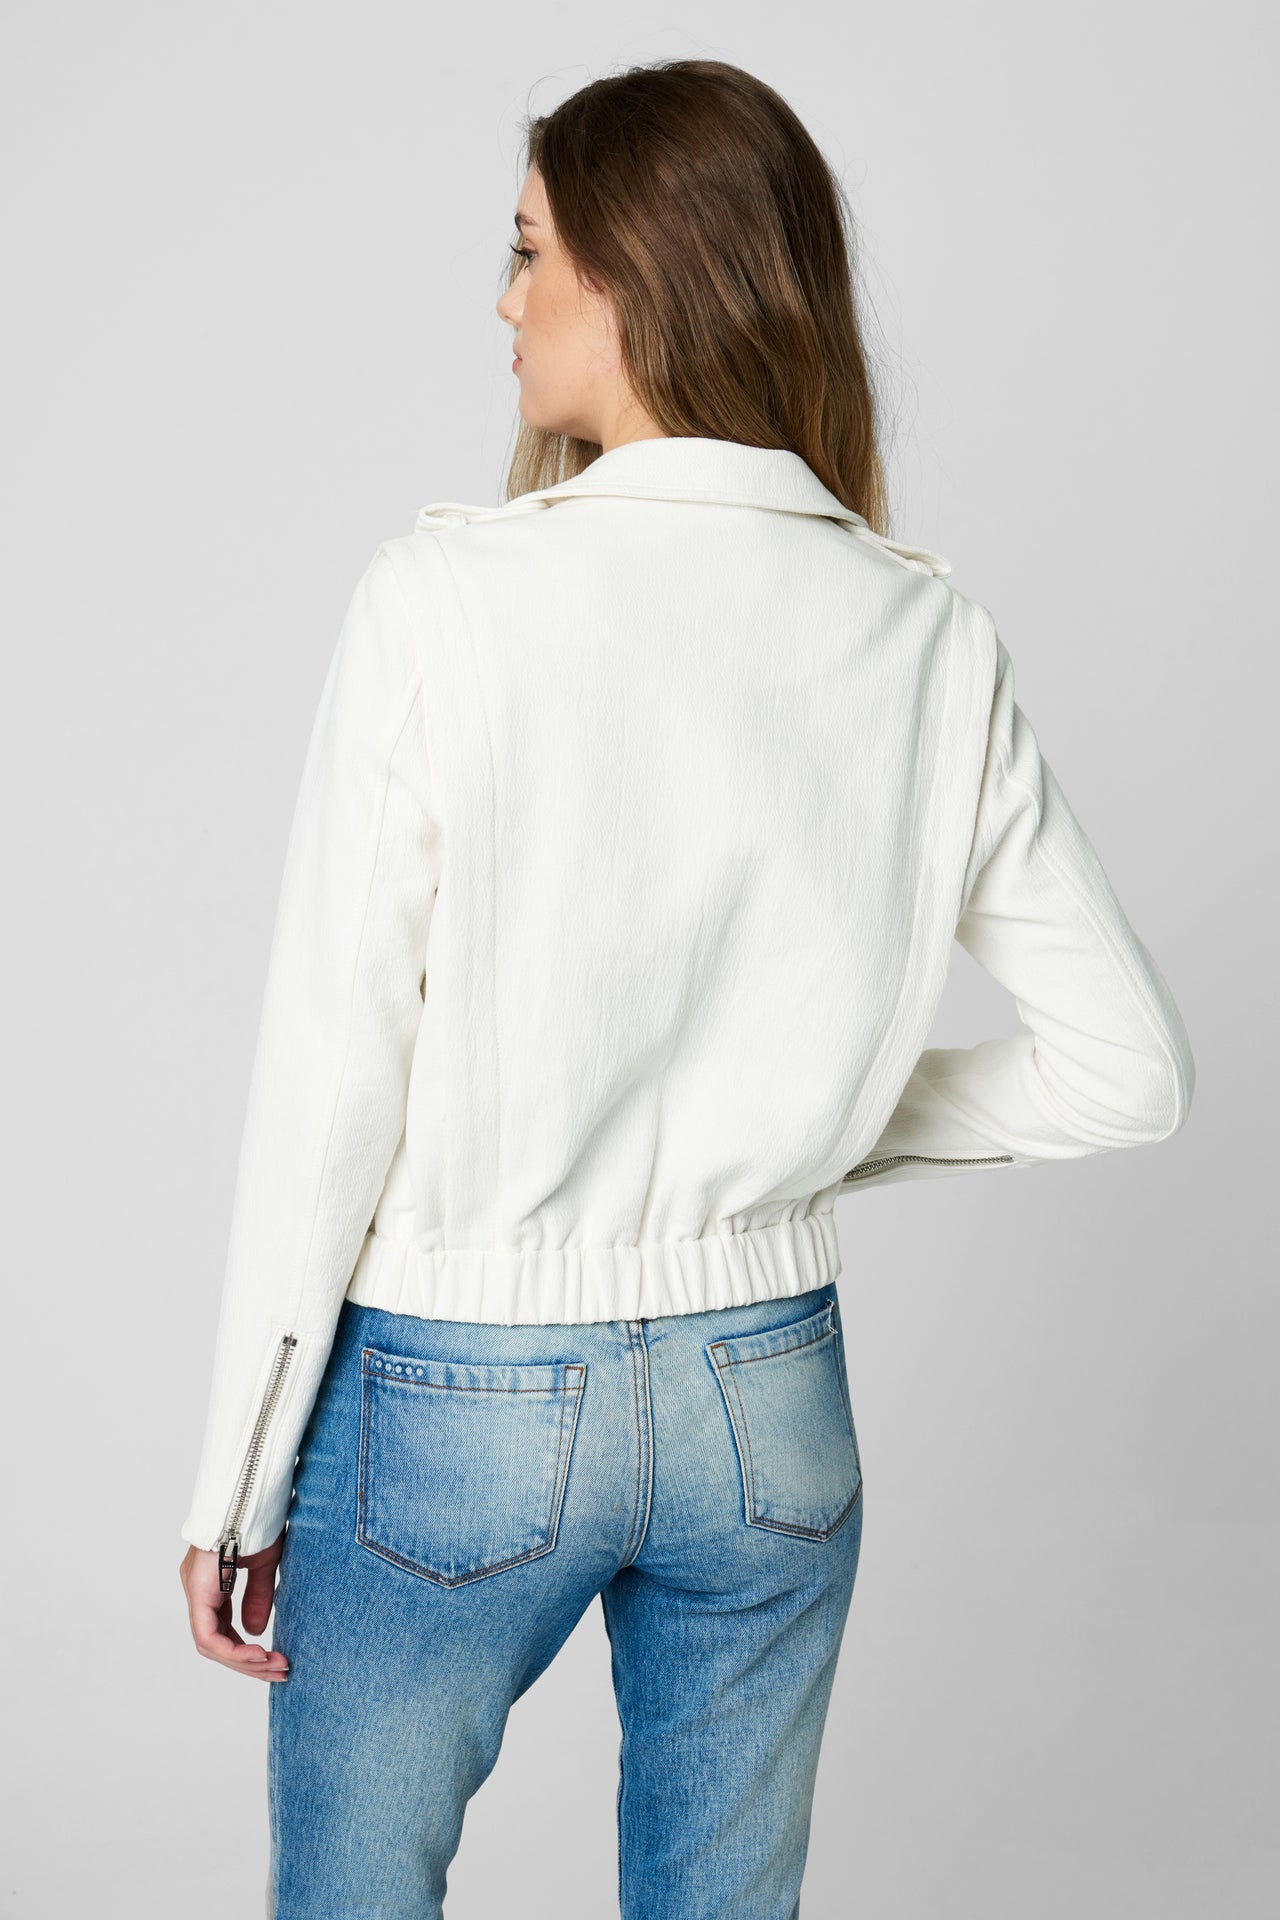 So Ice Jacket White, Jacket by Blank NYC | LIT Boutique